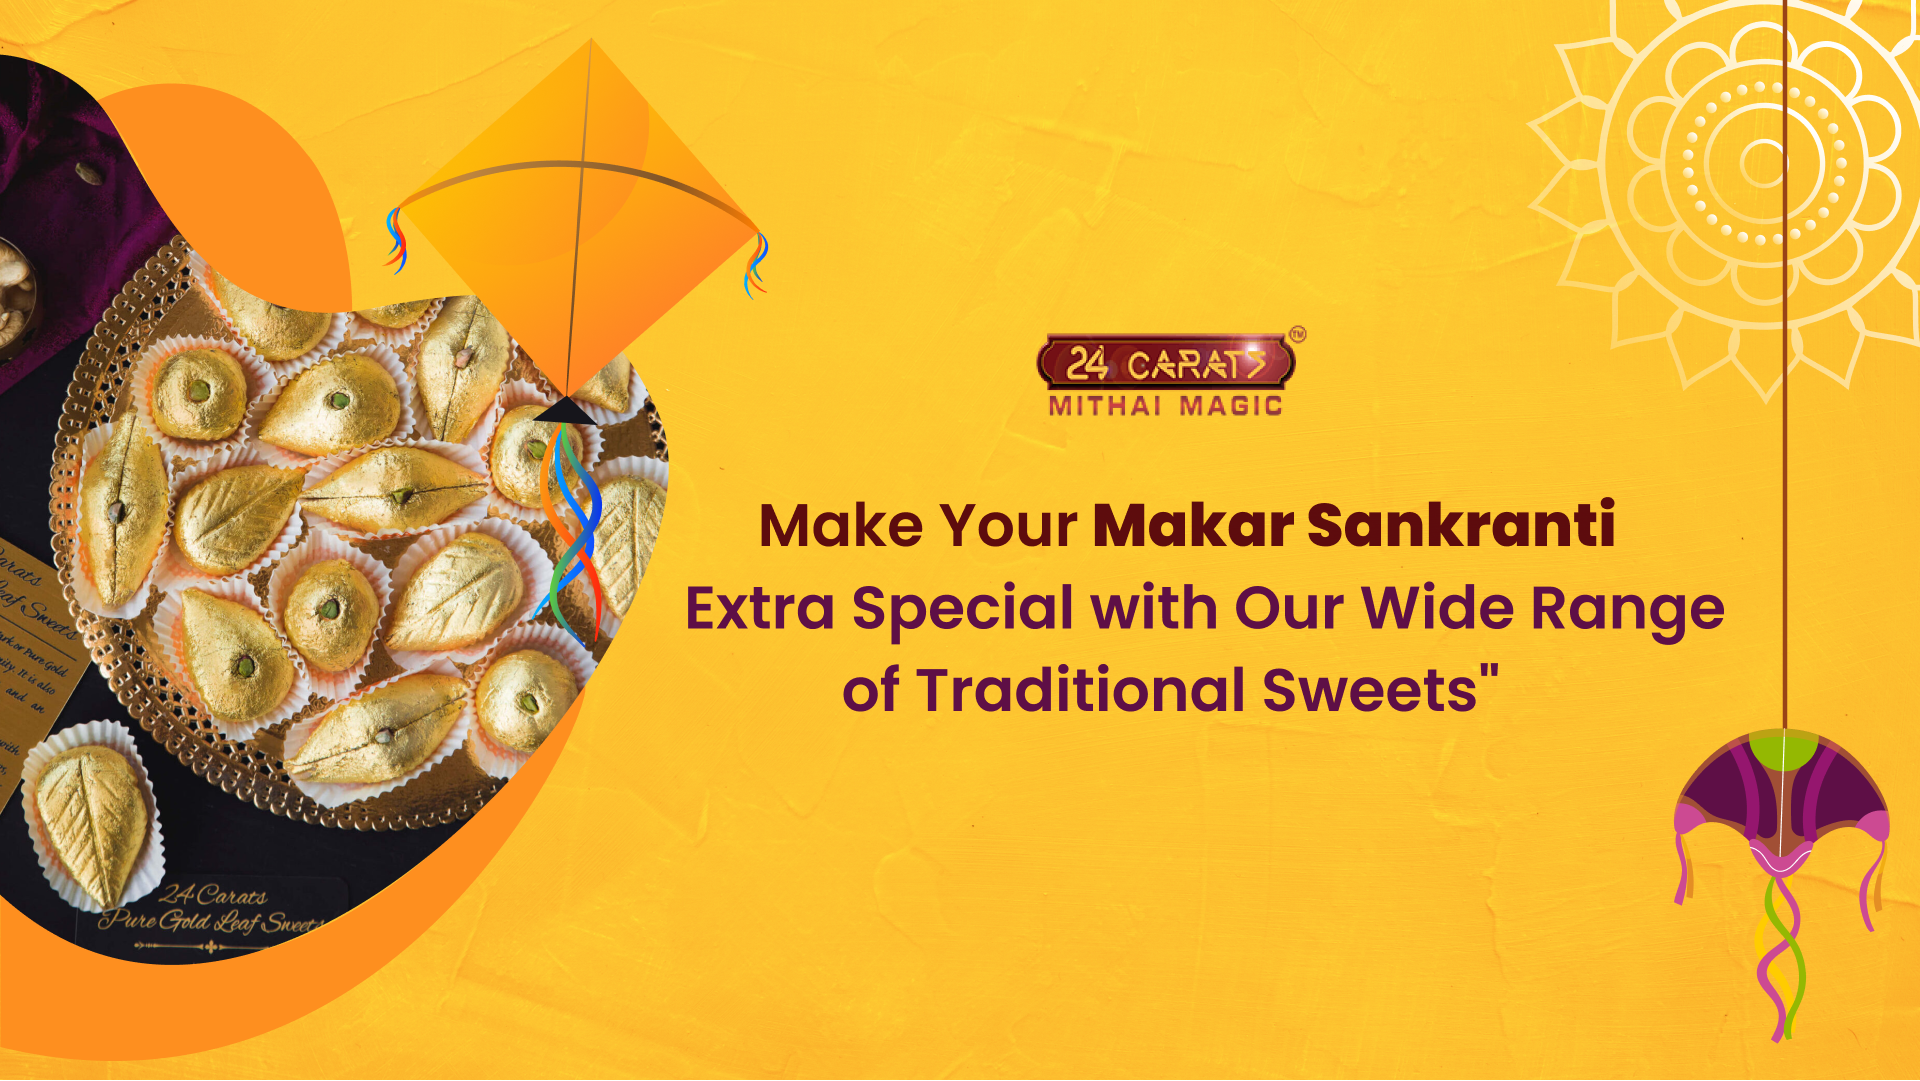 Make Your Makar Sankranti Special with Our Wide Range of Traditional Sweets